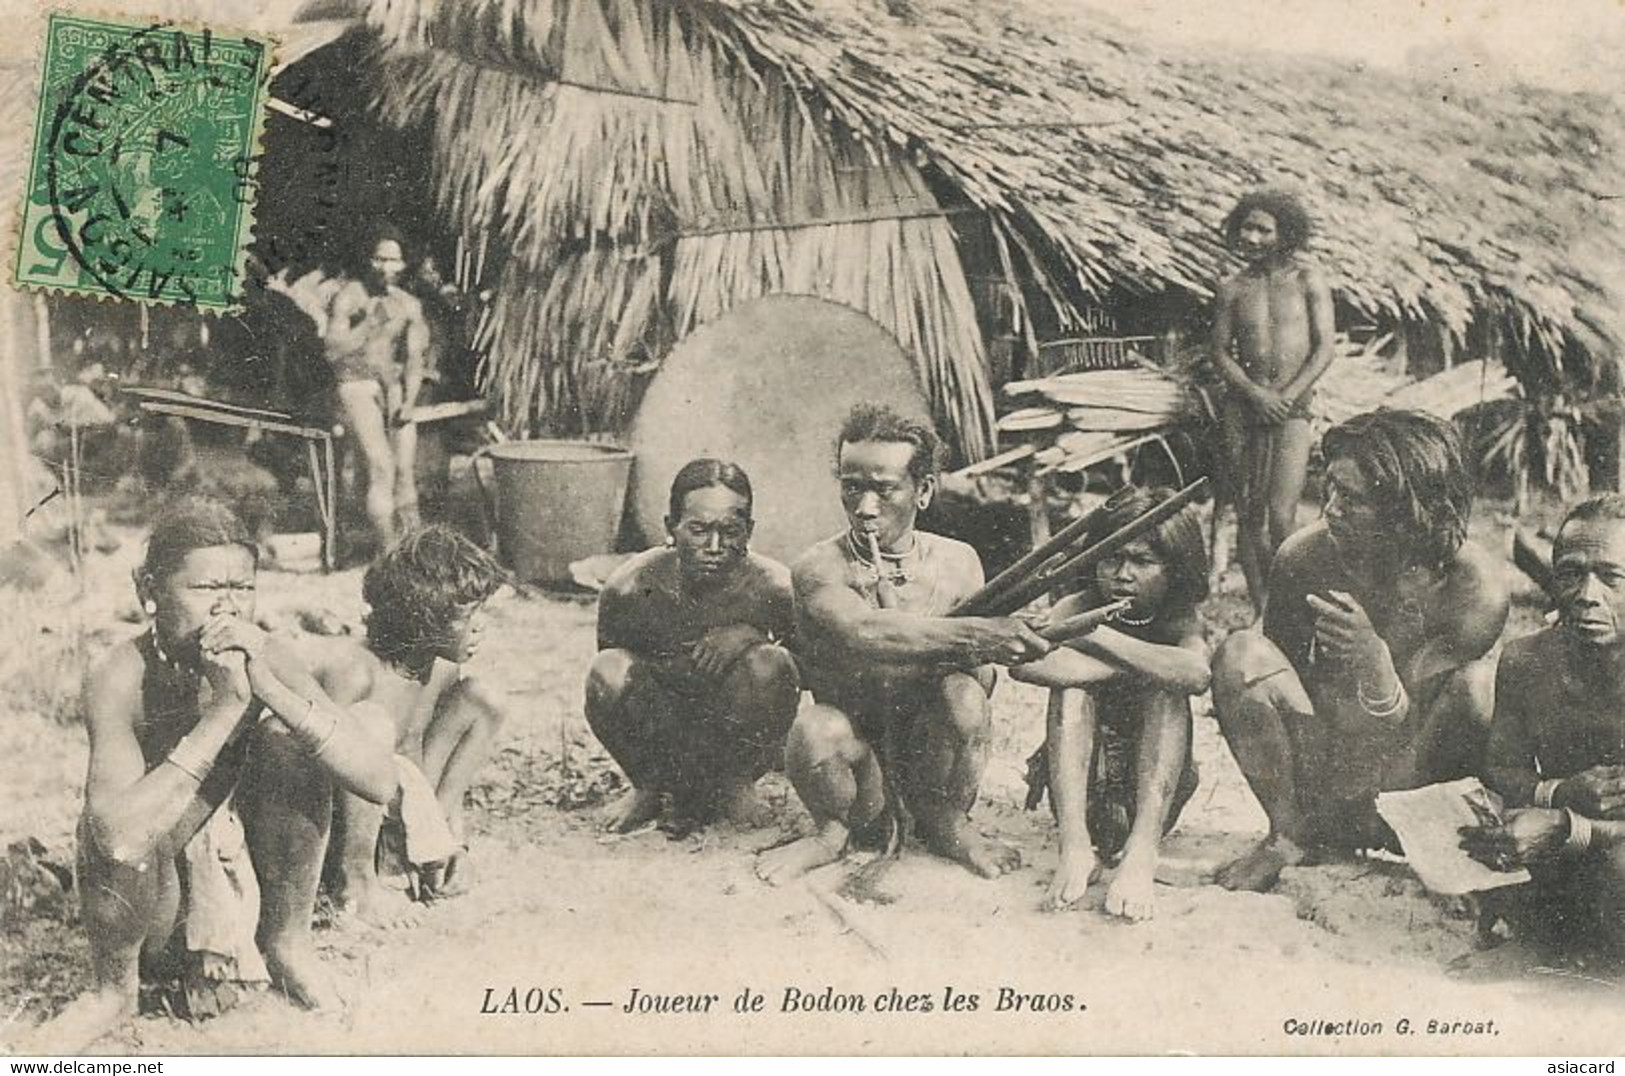 Nude Braos  Tribe In Lao . Playing Music Instrument .  Children. Coll. Barbat Sent To Pyrotechnie Esperance Saigon - Asia